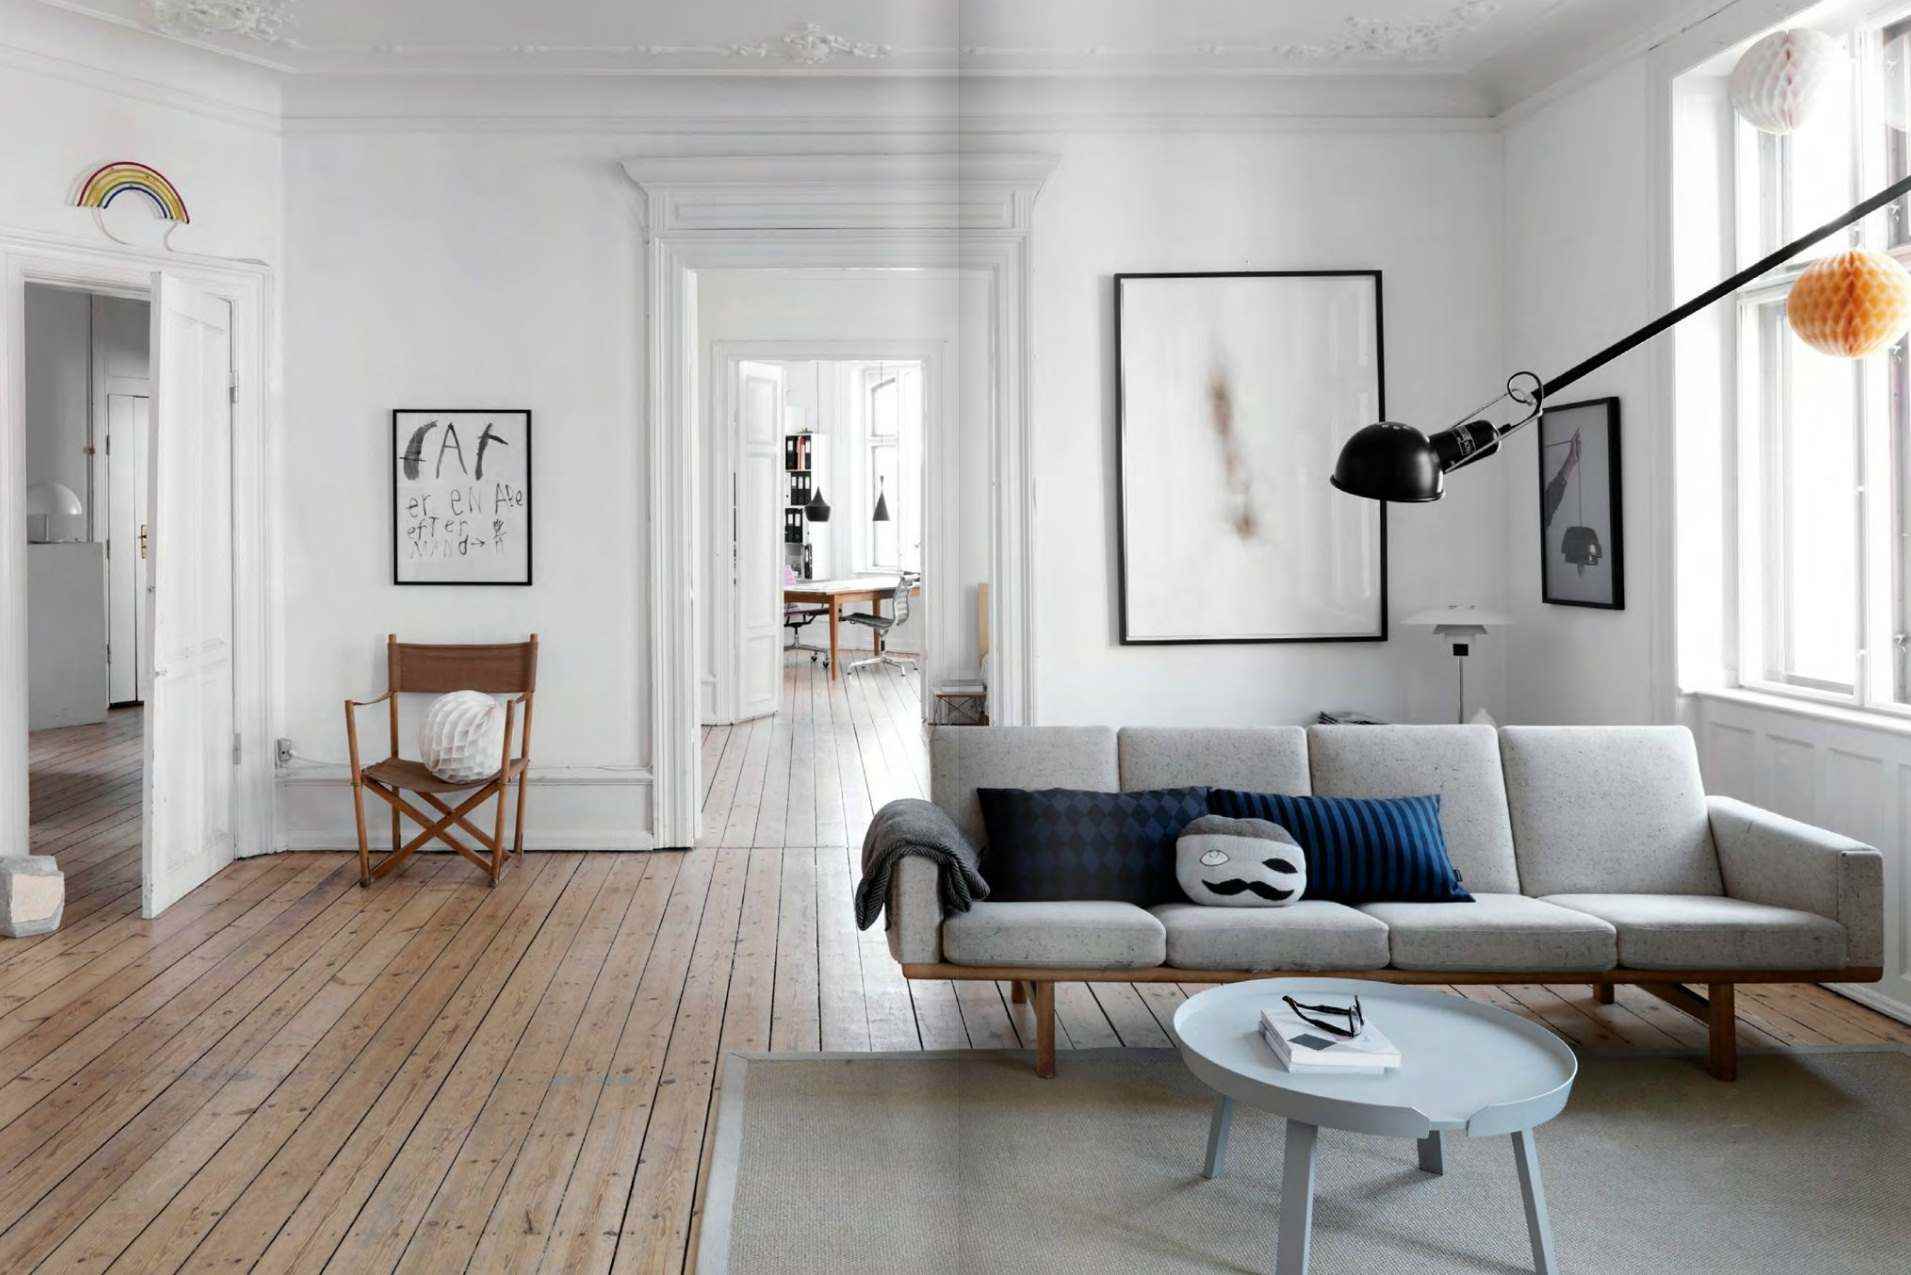 an example of the use of a beautiful Scandinavian style in design